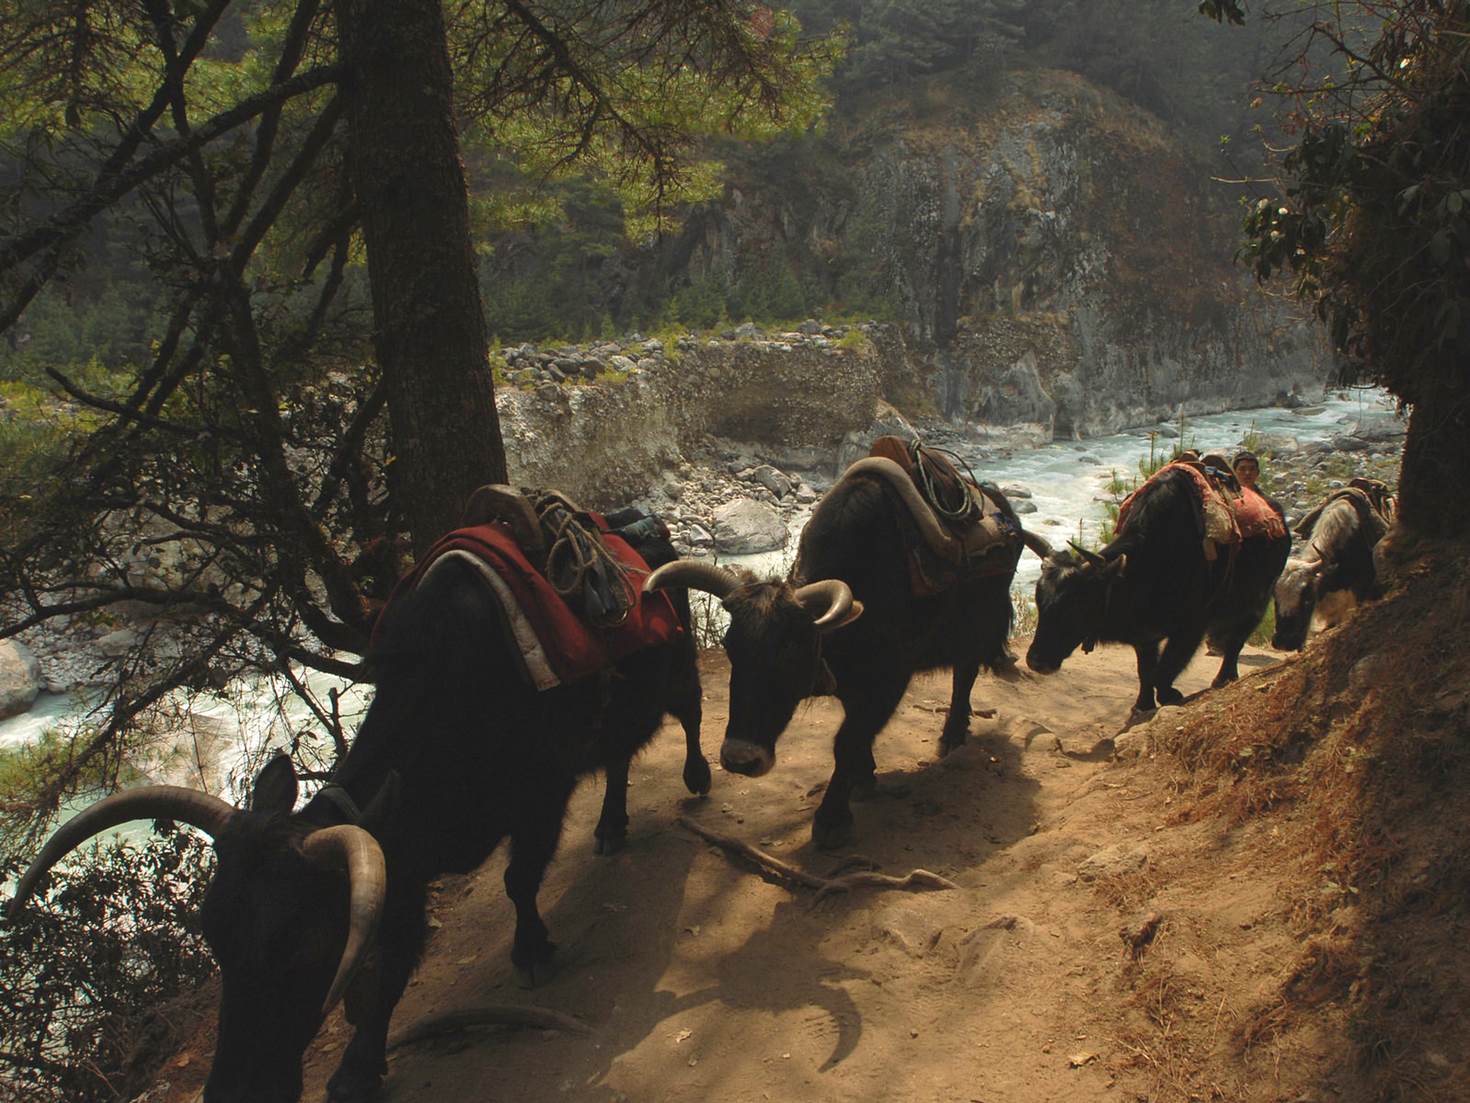 Yak and dzo trains are a common sight on the trails through Solukhumbu Â© Joe Bindloss / Lonely Planet